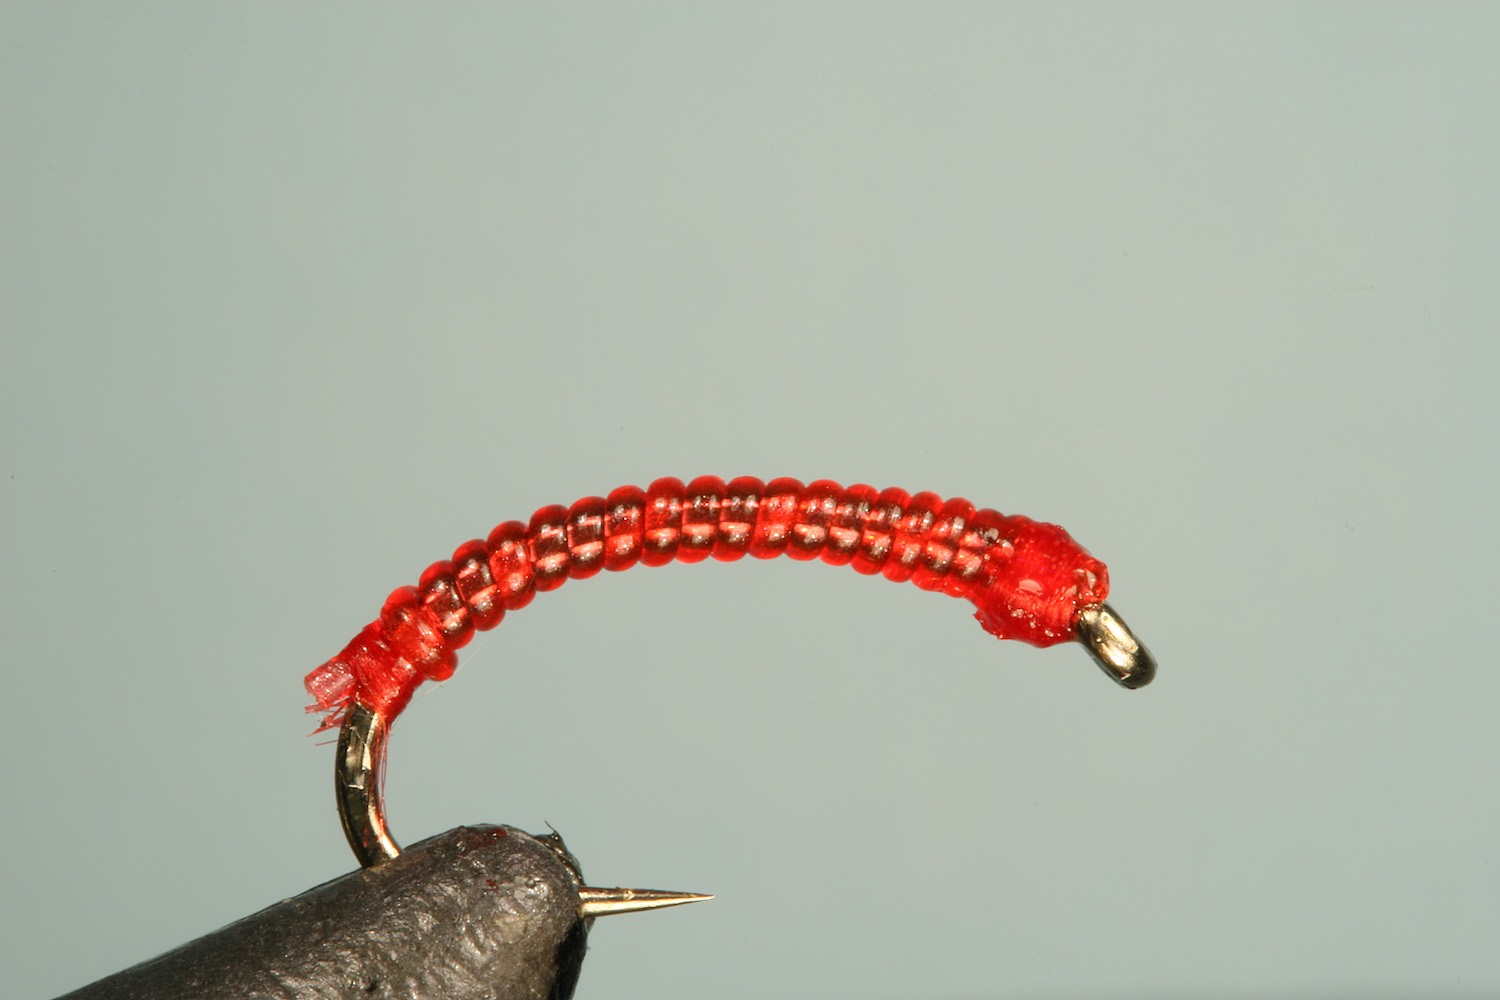 Step 2 of tying sequence for jelly bloodworm fly pattern